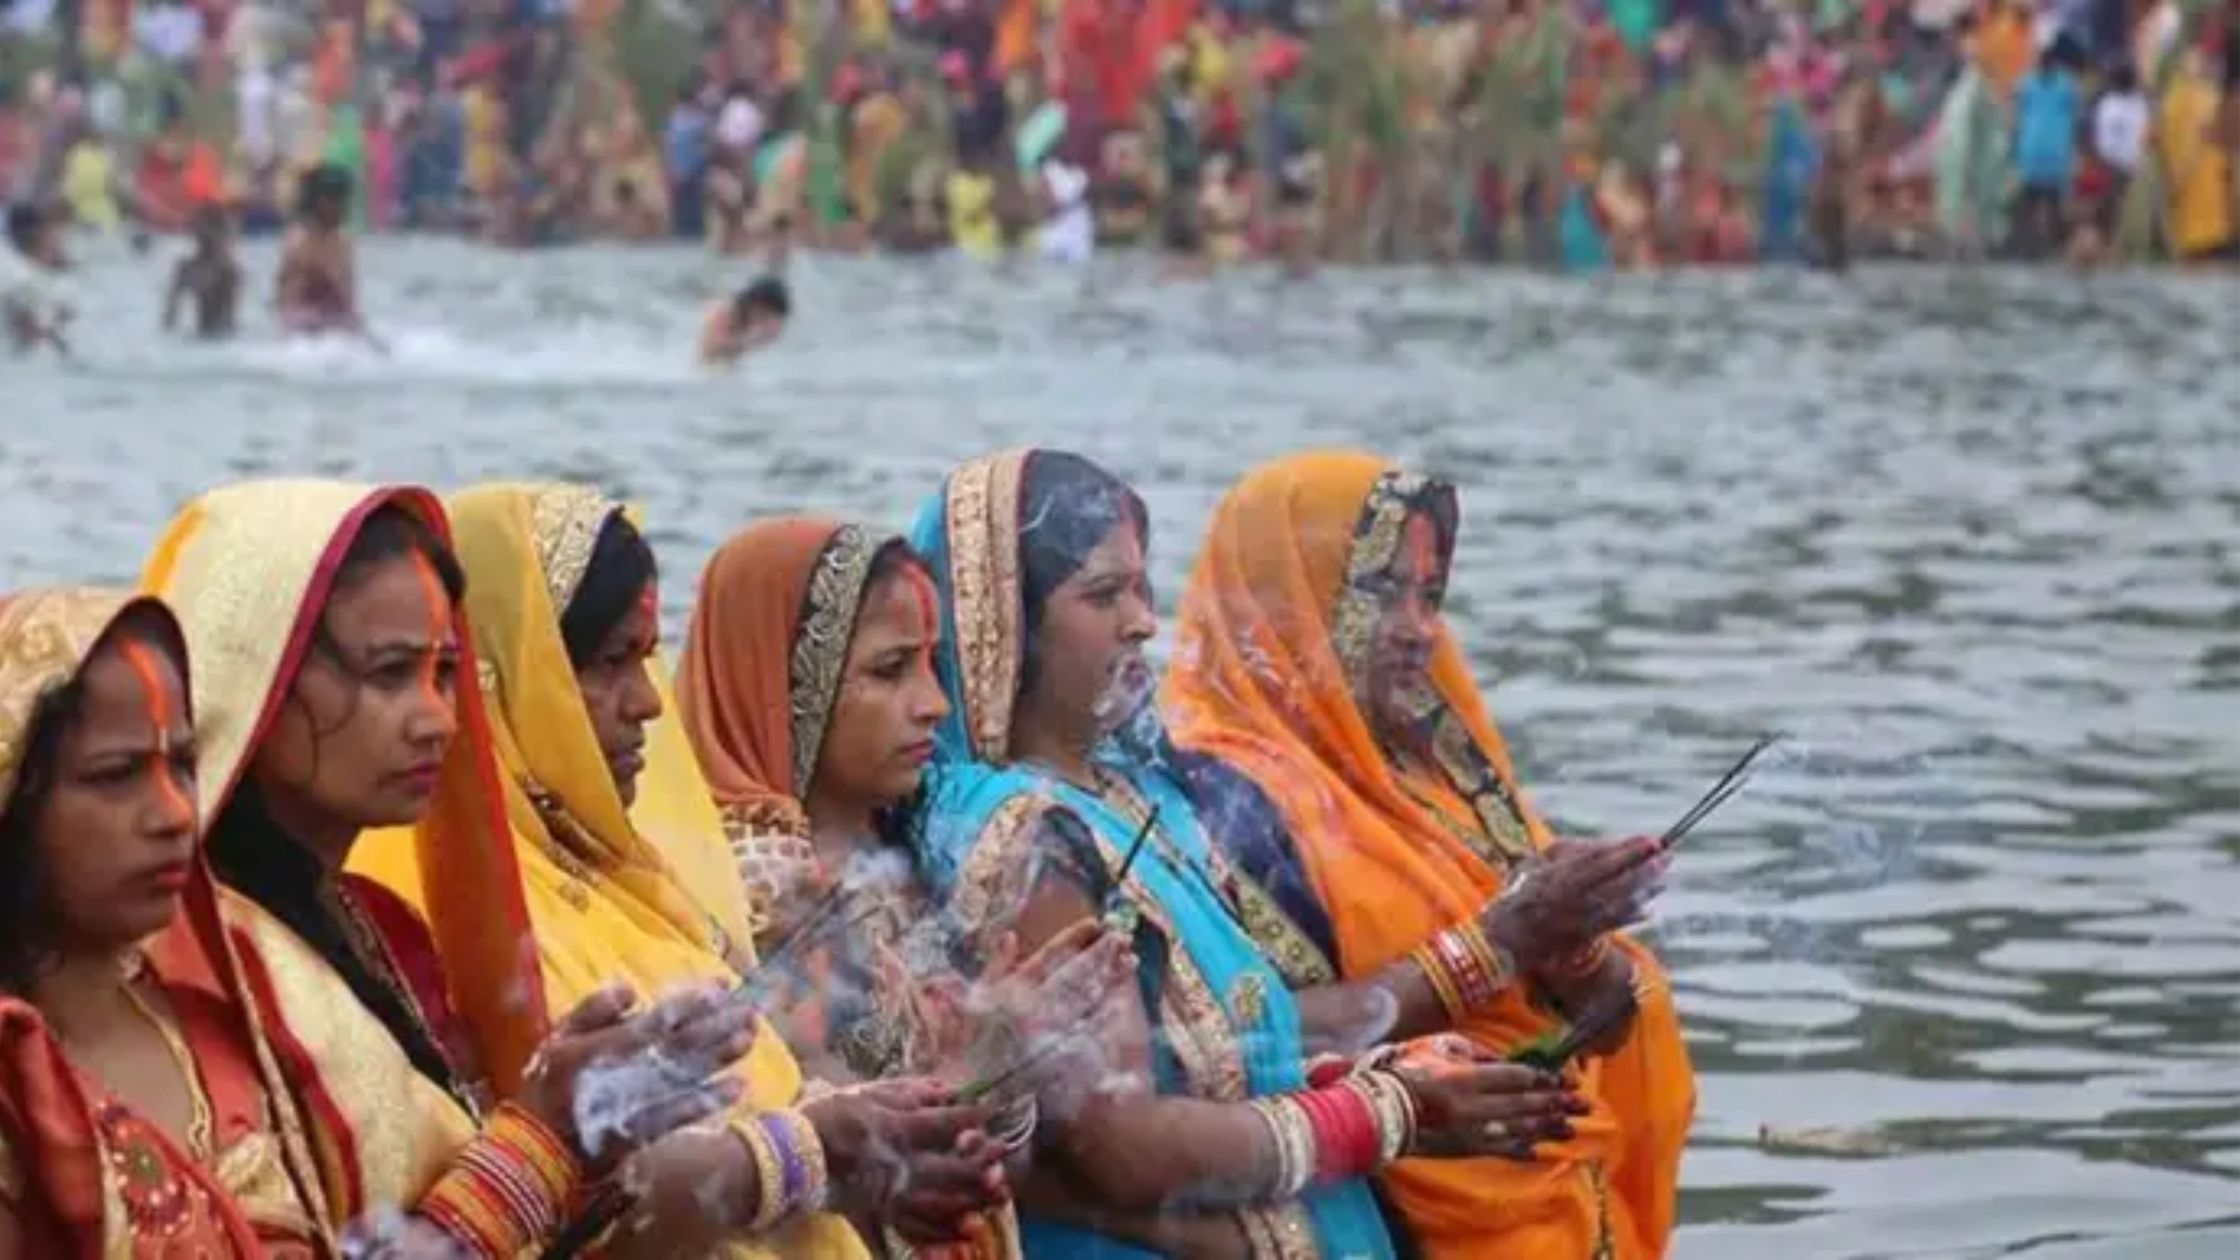 Chhath is celebrated with pomp